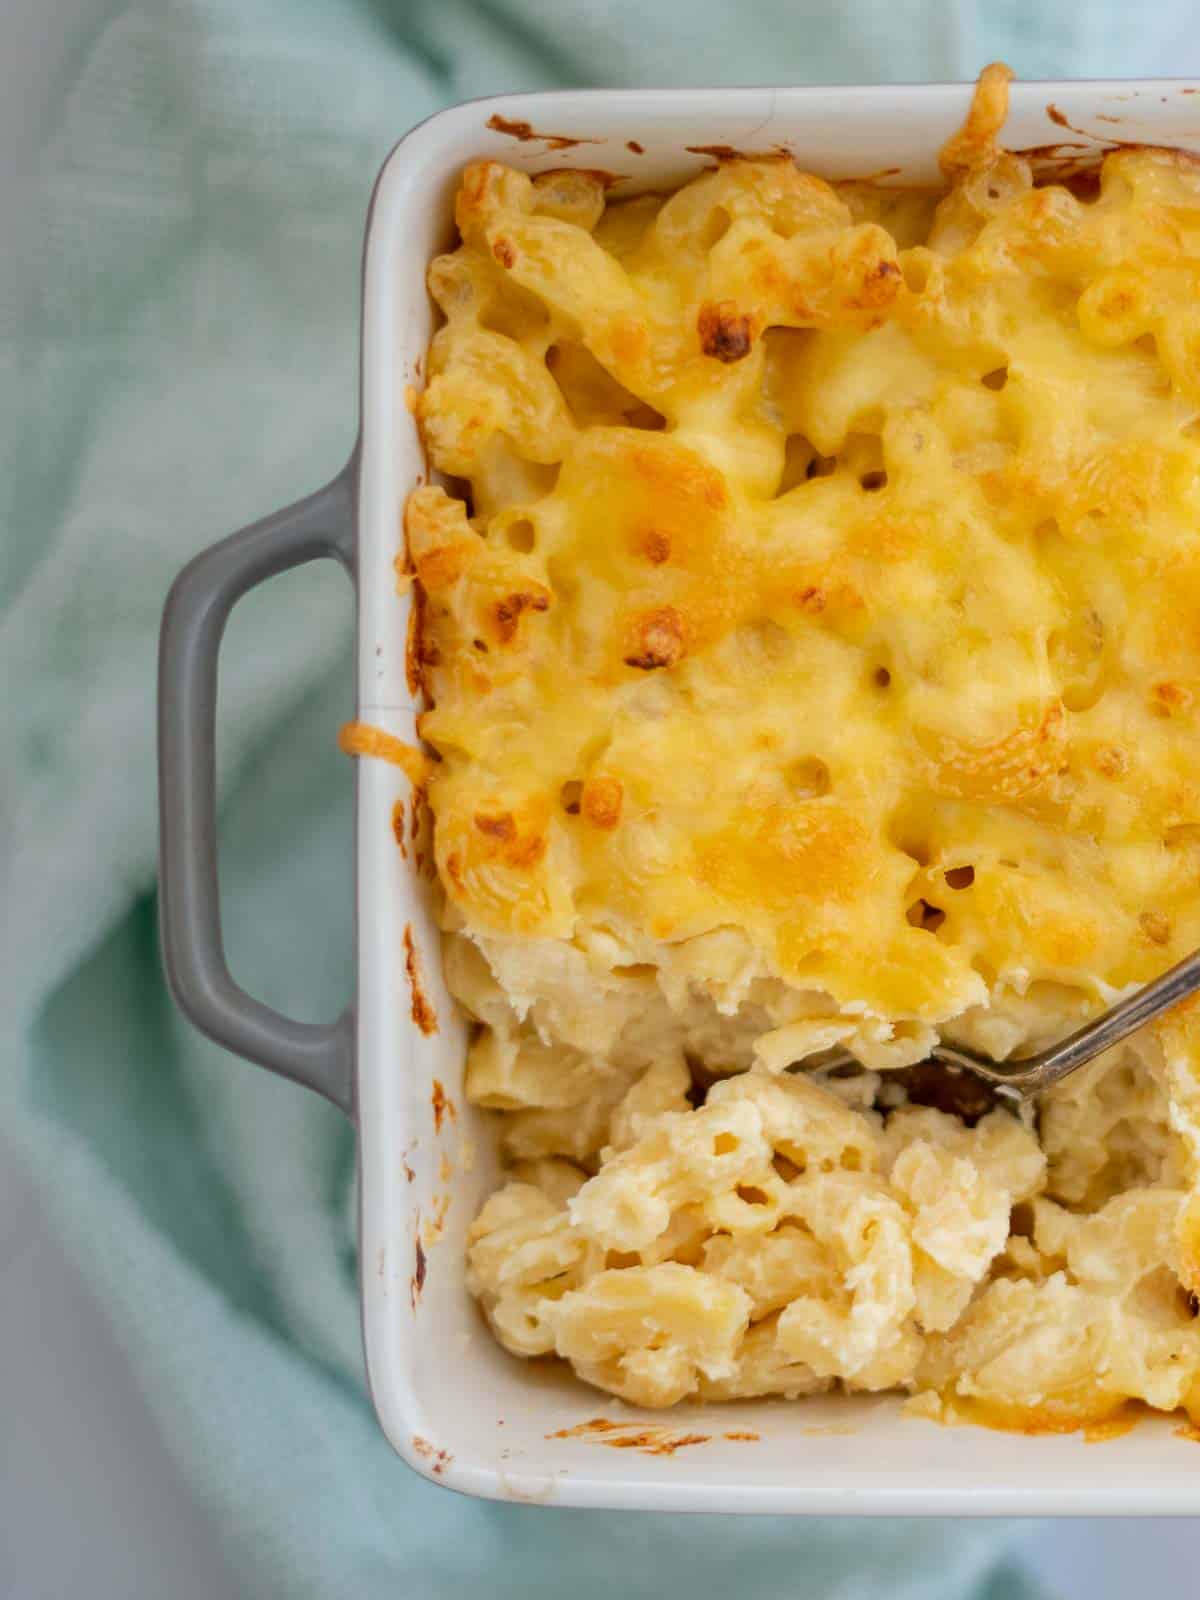 Baked mac and cheese ready to serve with melted golden cheese on top